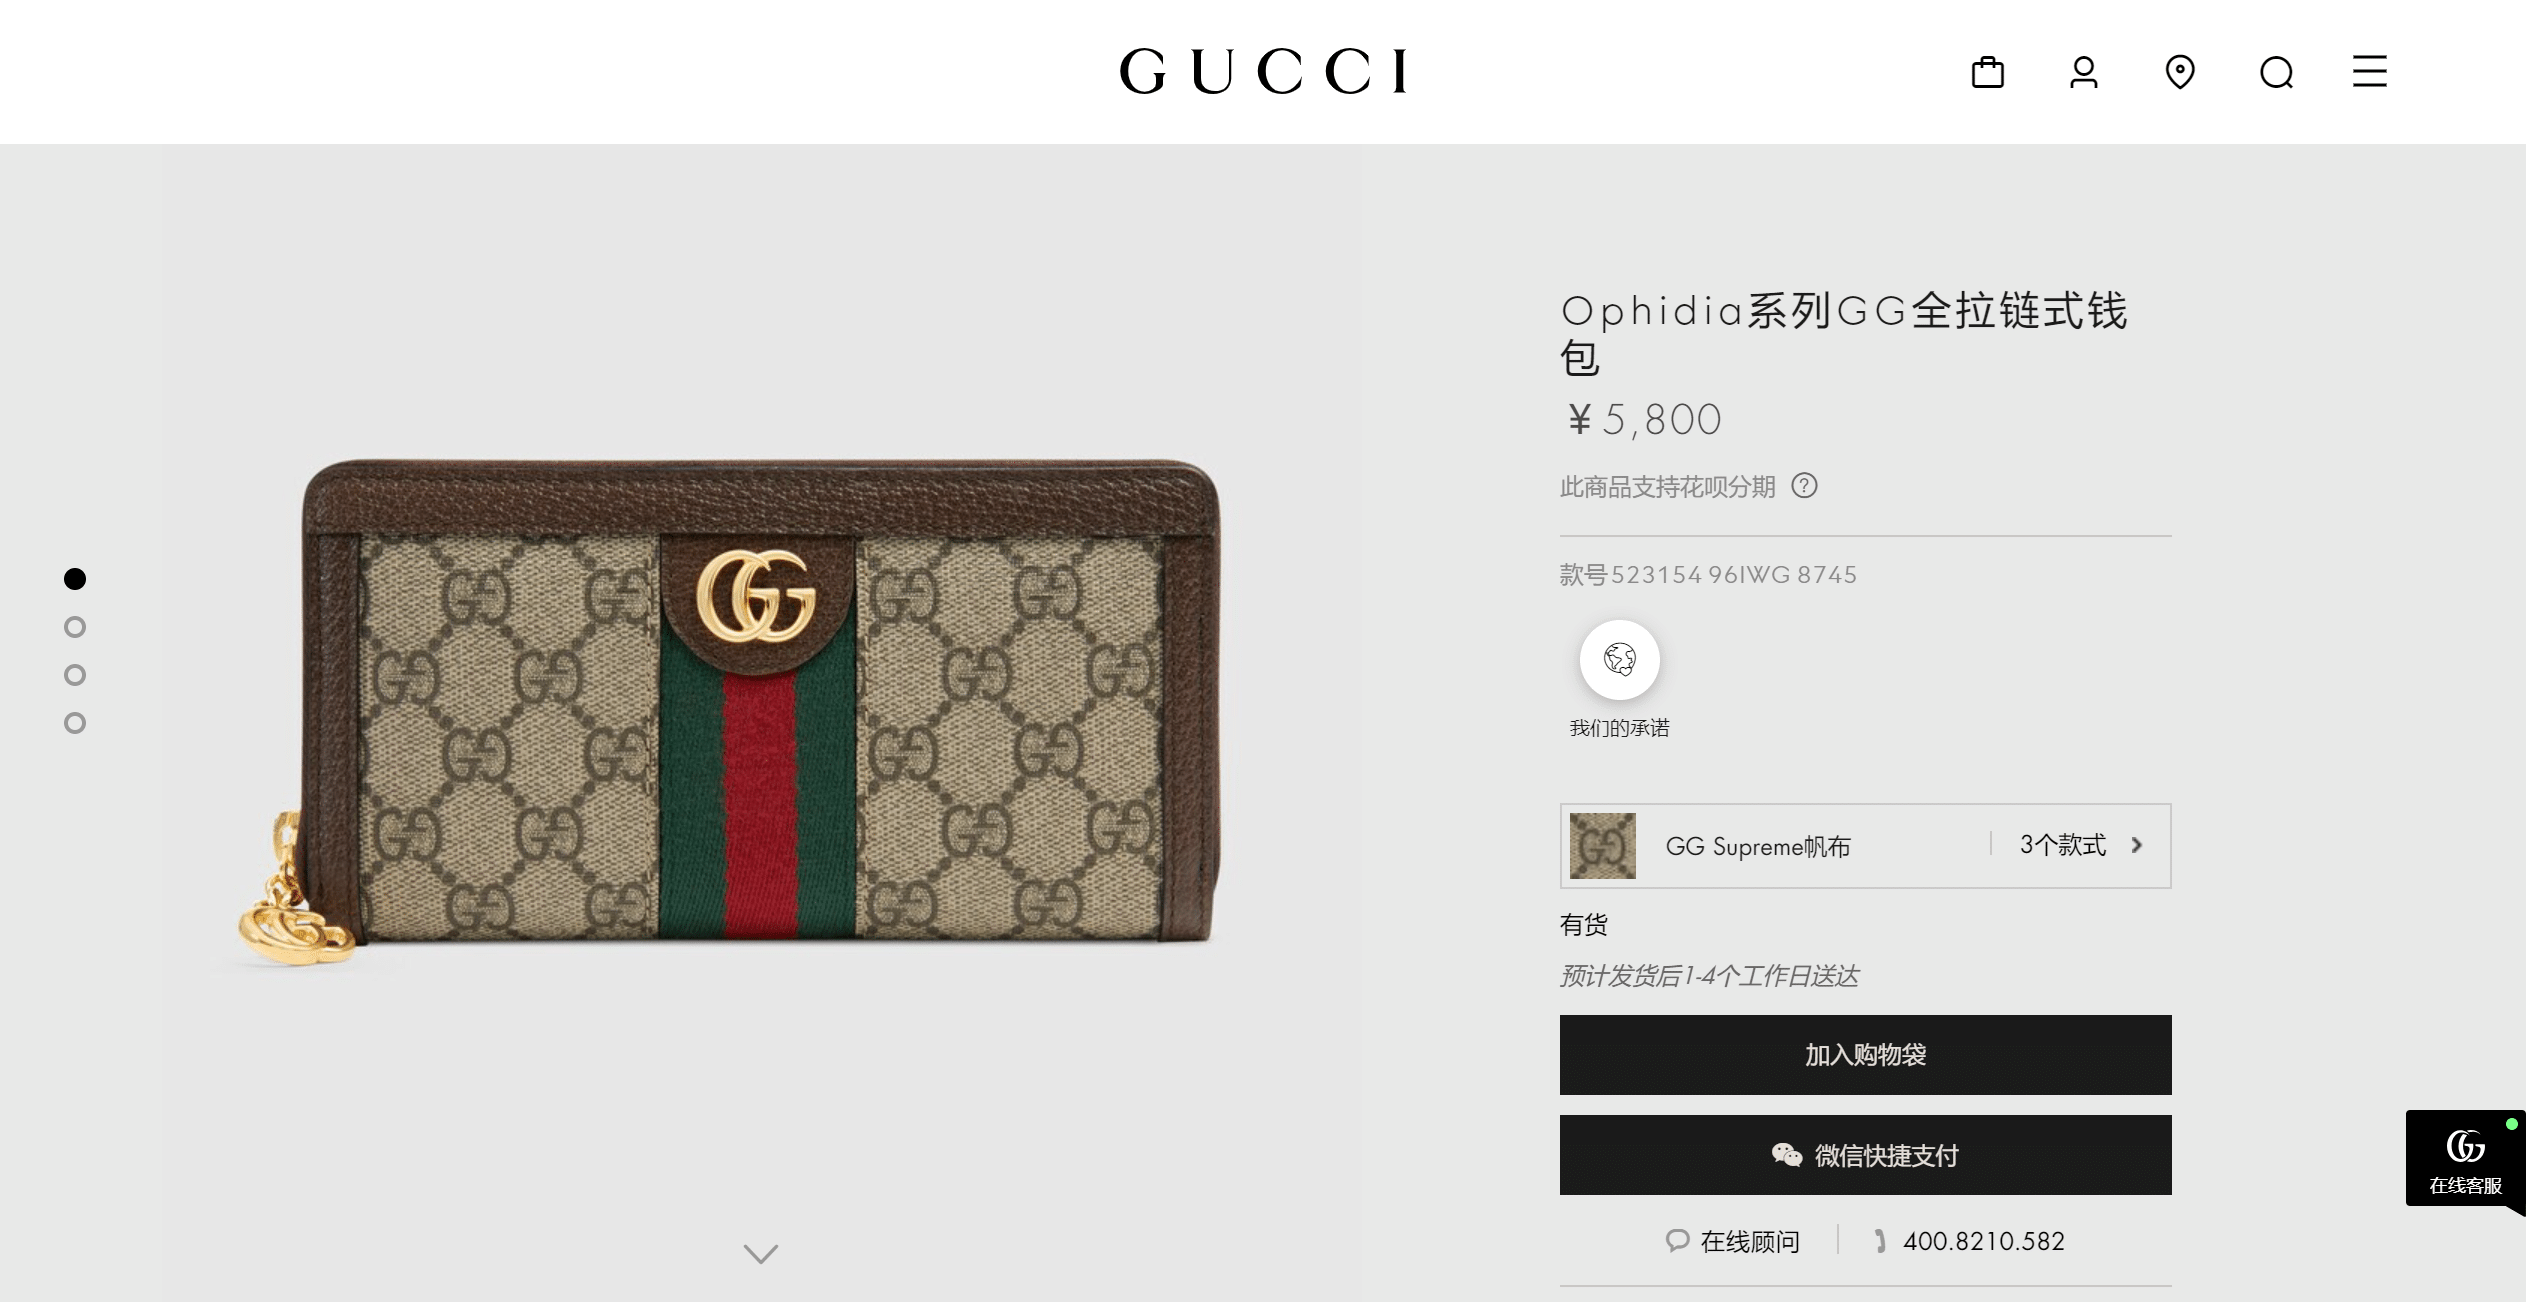 GG-SupremeOphidiaGG-GUCCI2b5d586a38df121c.png